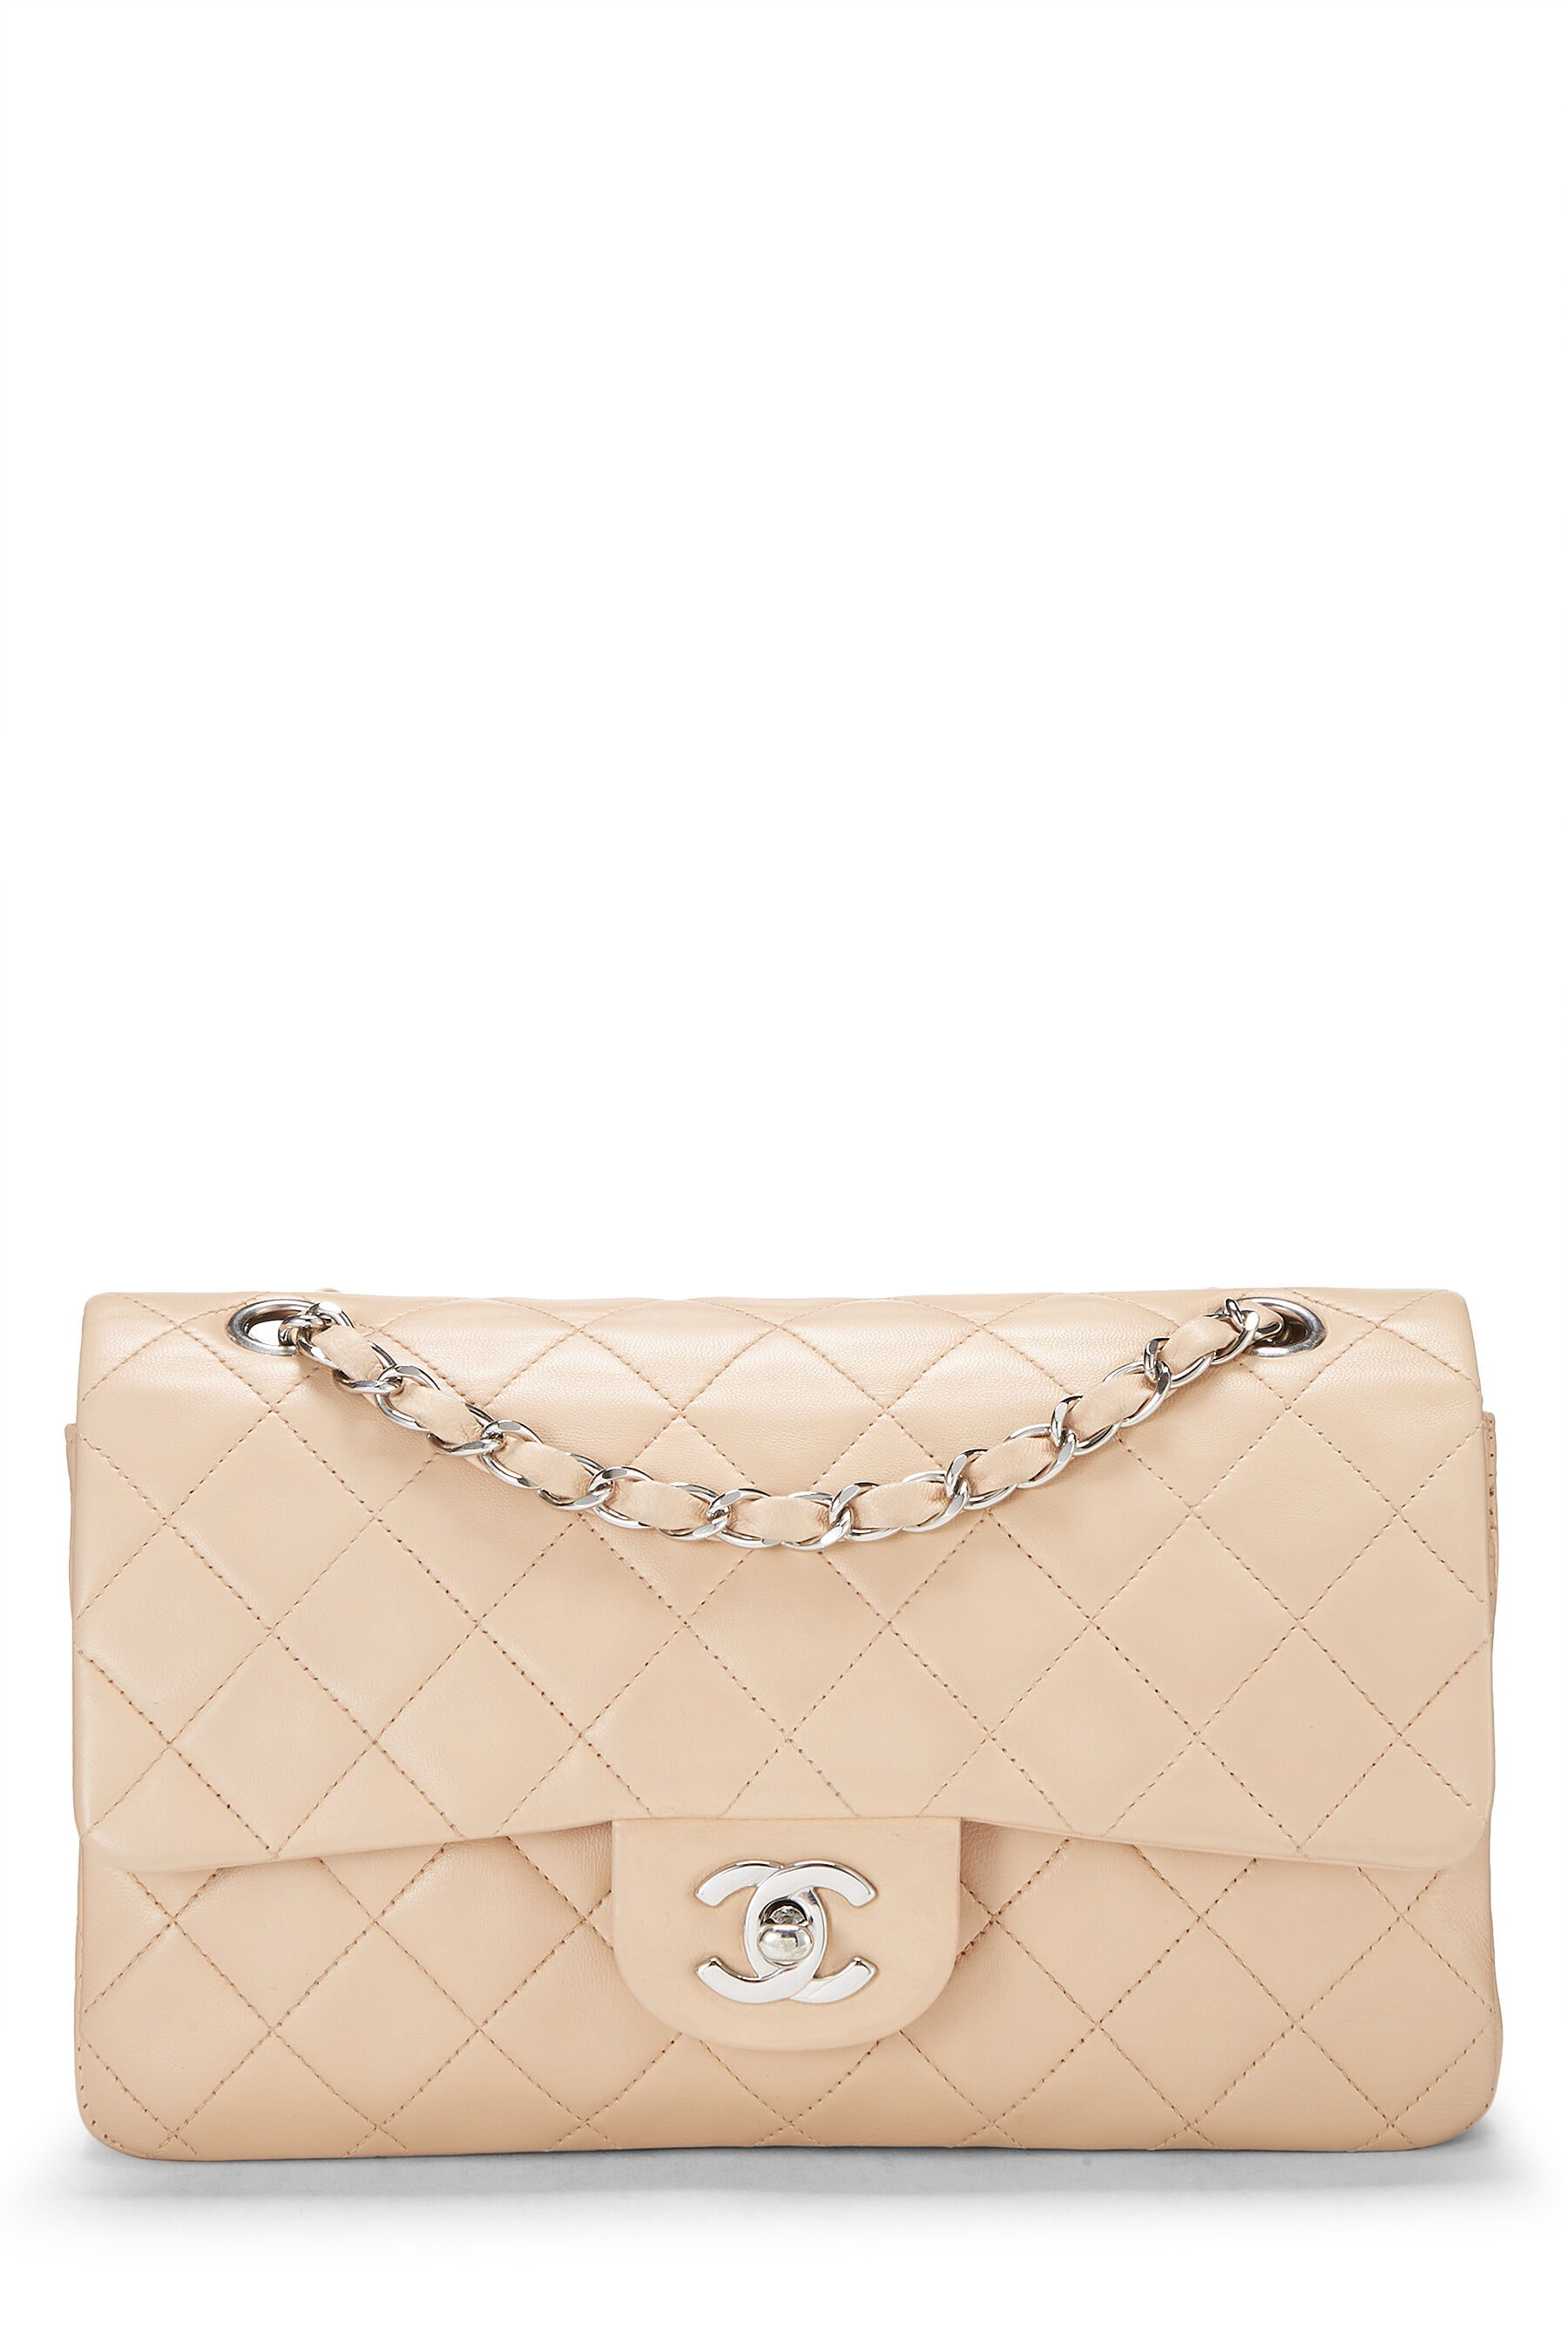 Chanel - Pink Quilted Lambskin Classic Double Flap Small